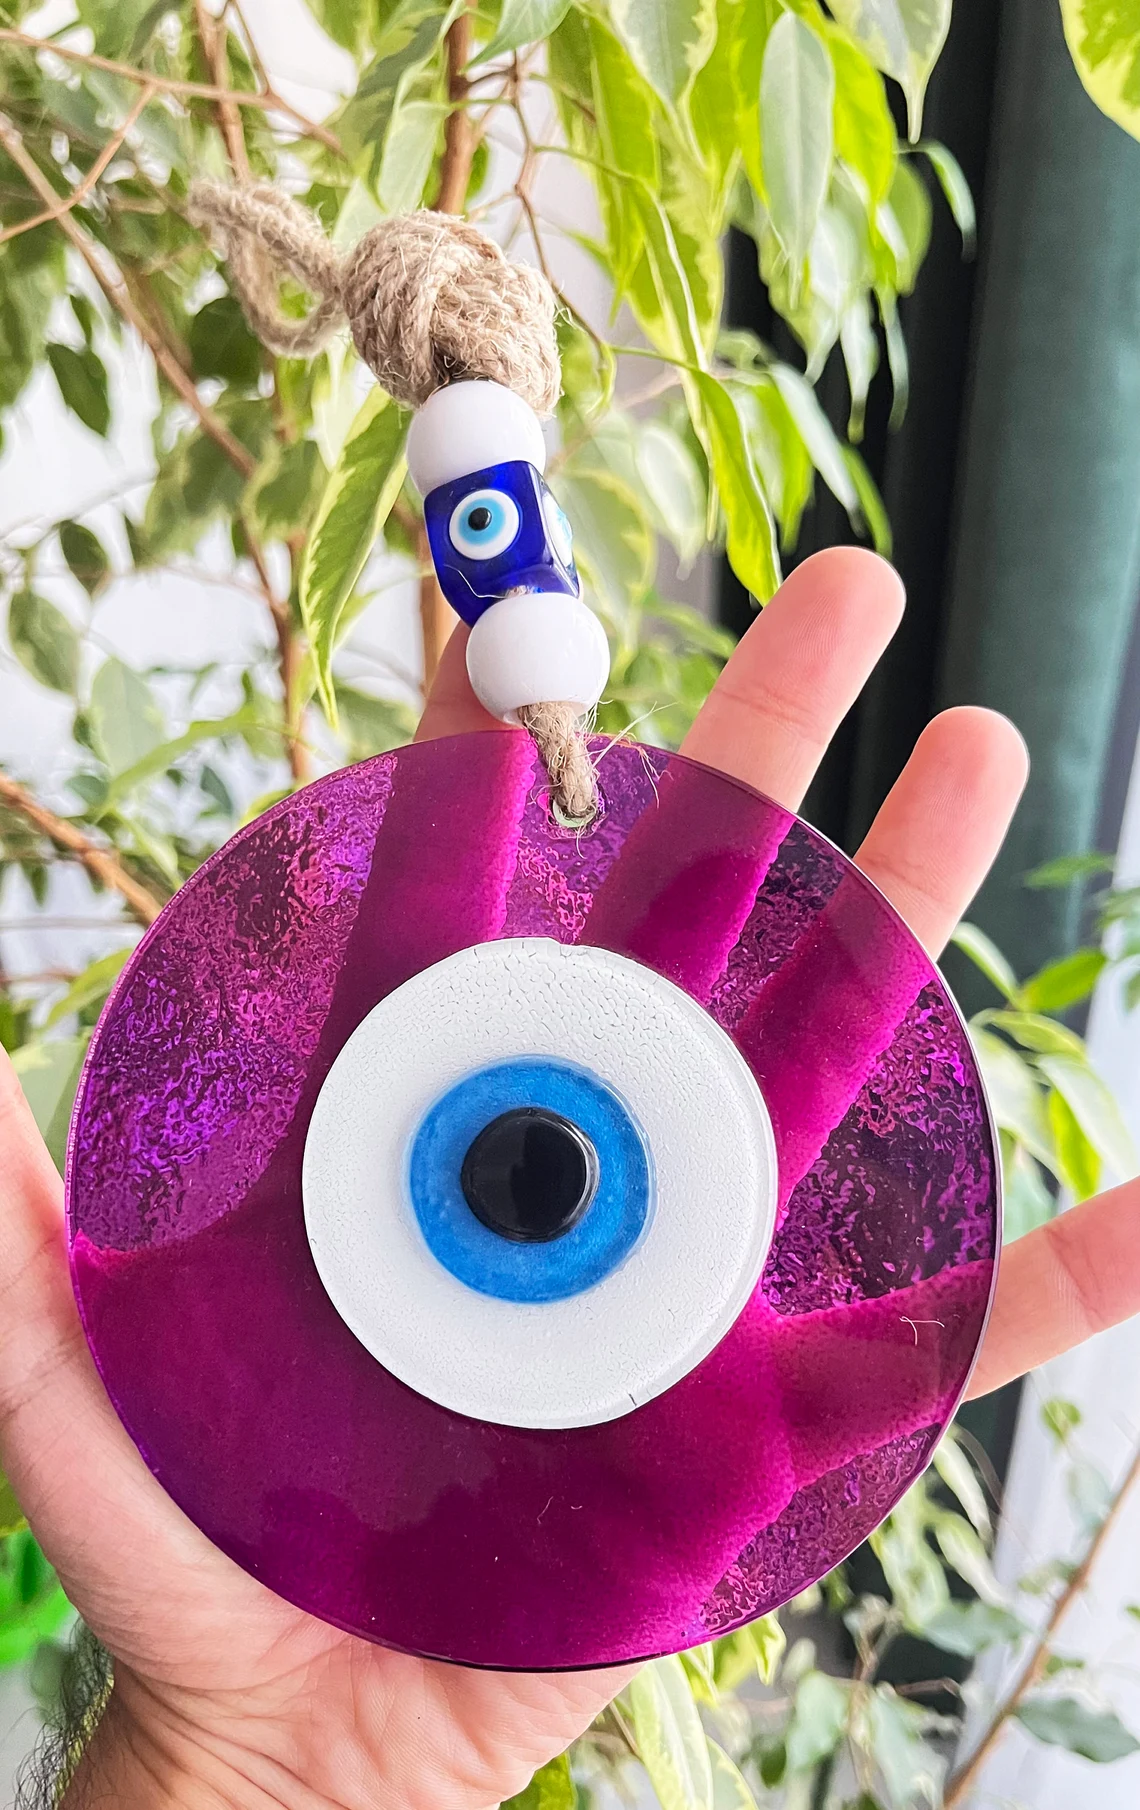 Purple Transparent Evil Eye Wall Hanging - Shop of Turkey - Buy from Turkey  with Fast Shipping